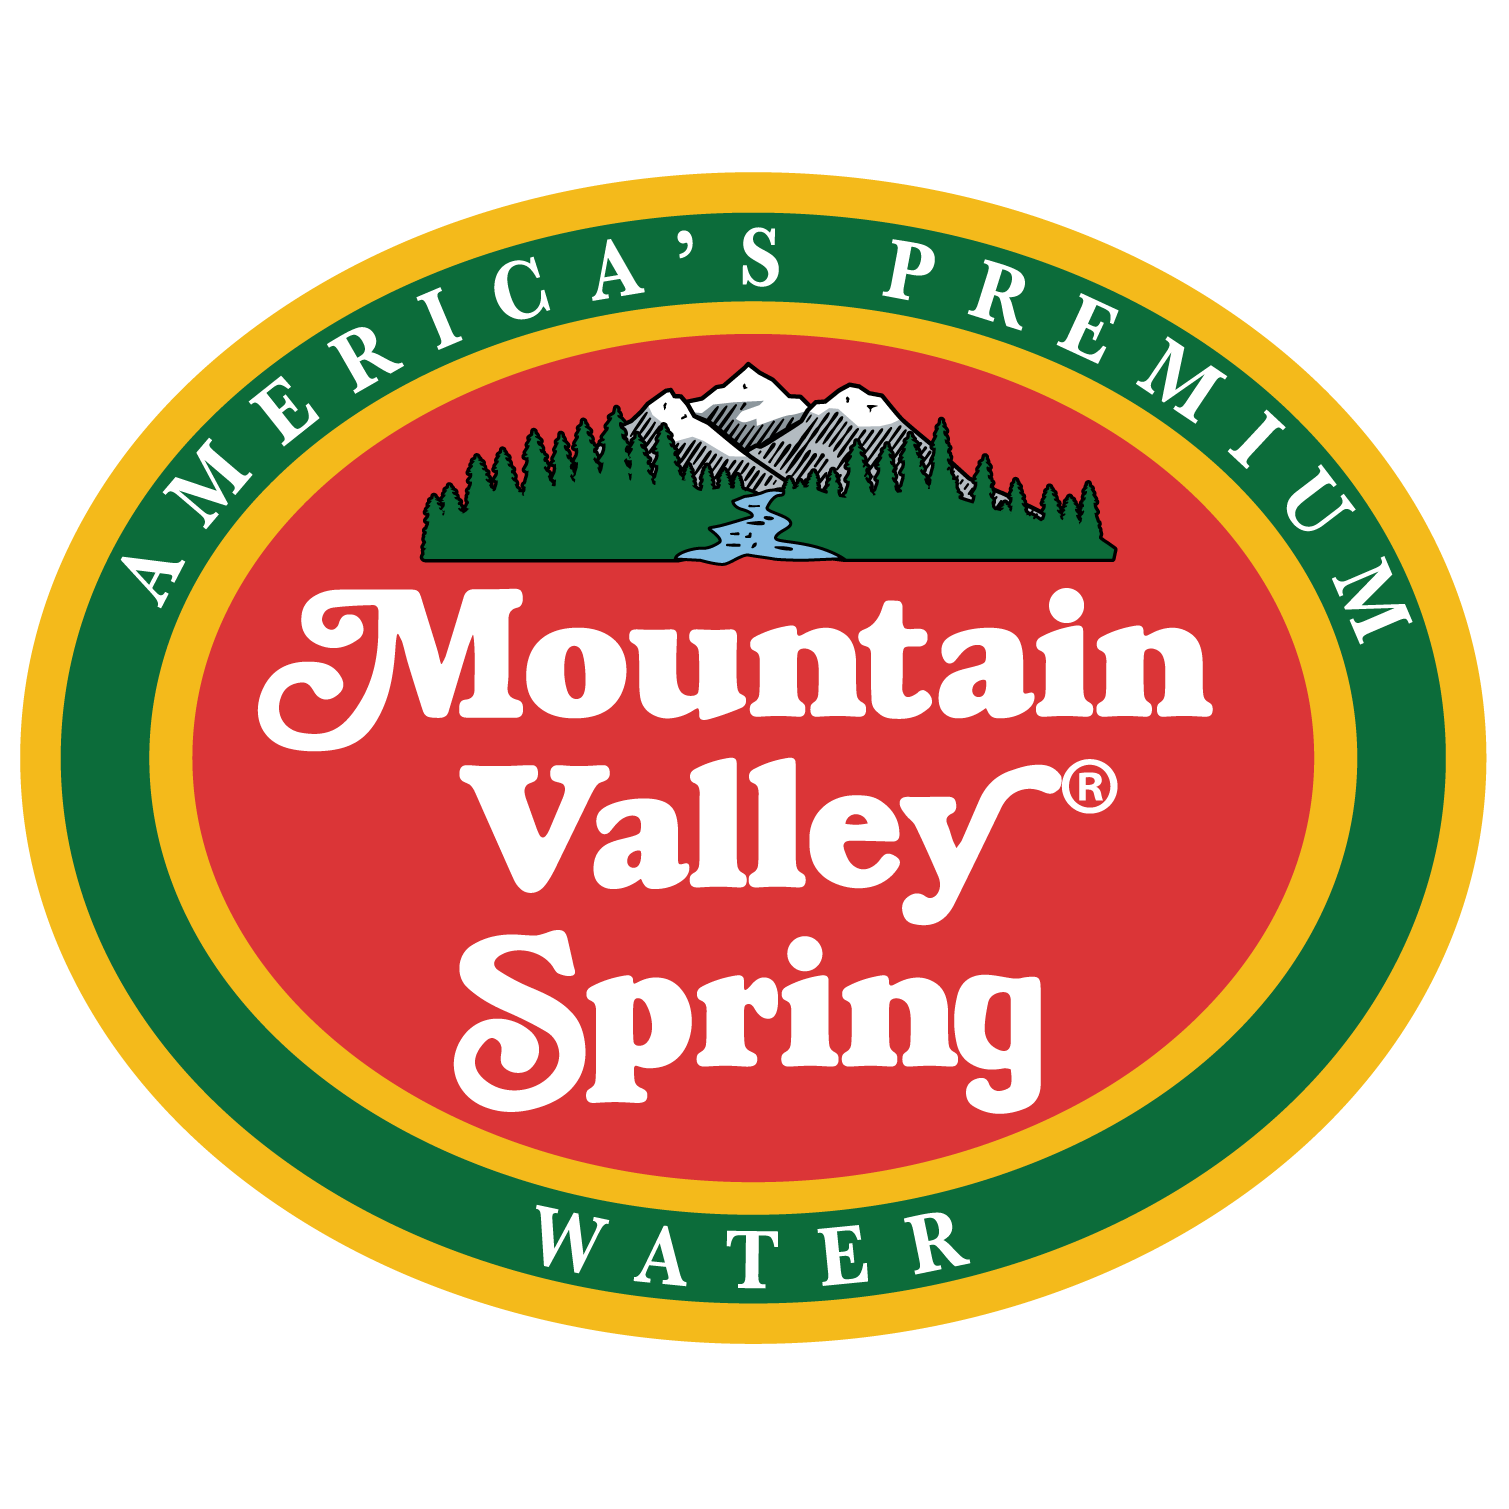 Mountain Valley Spring Water of Asheville